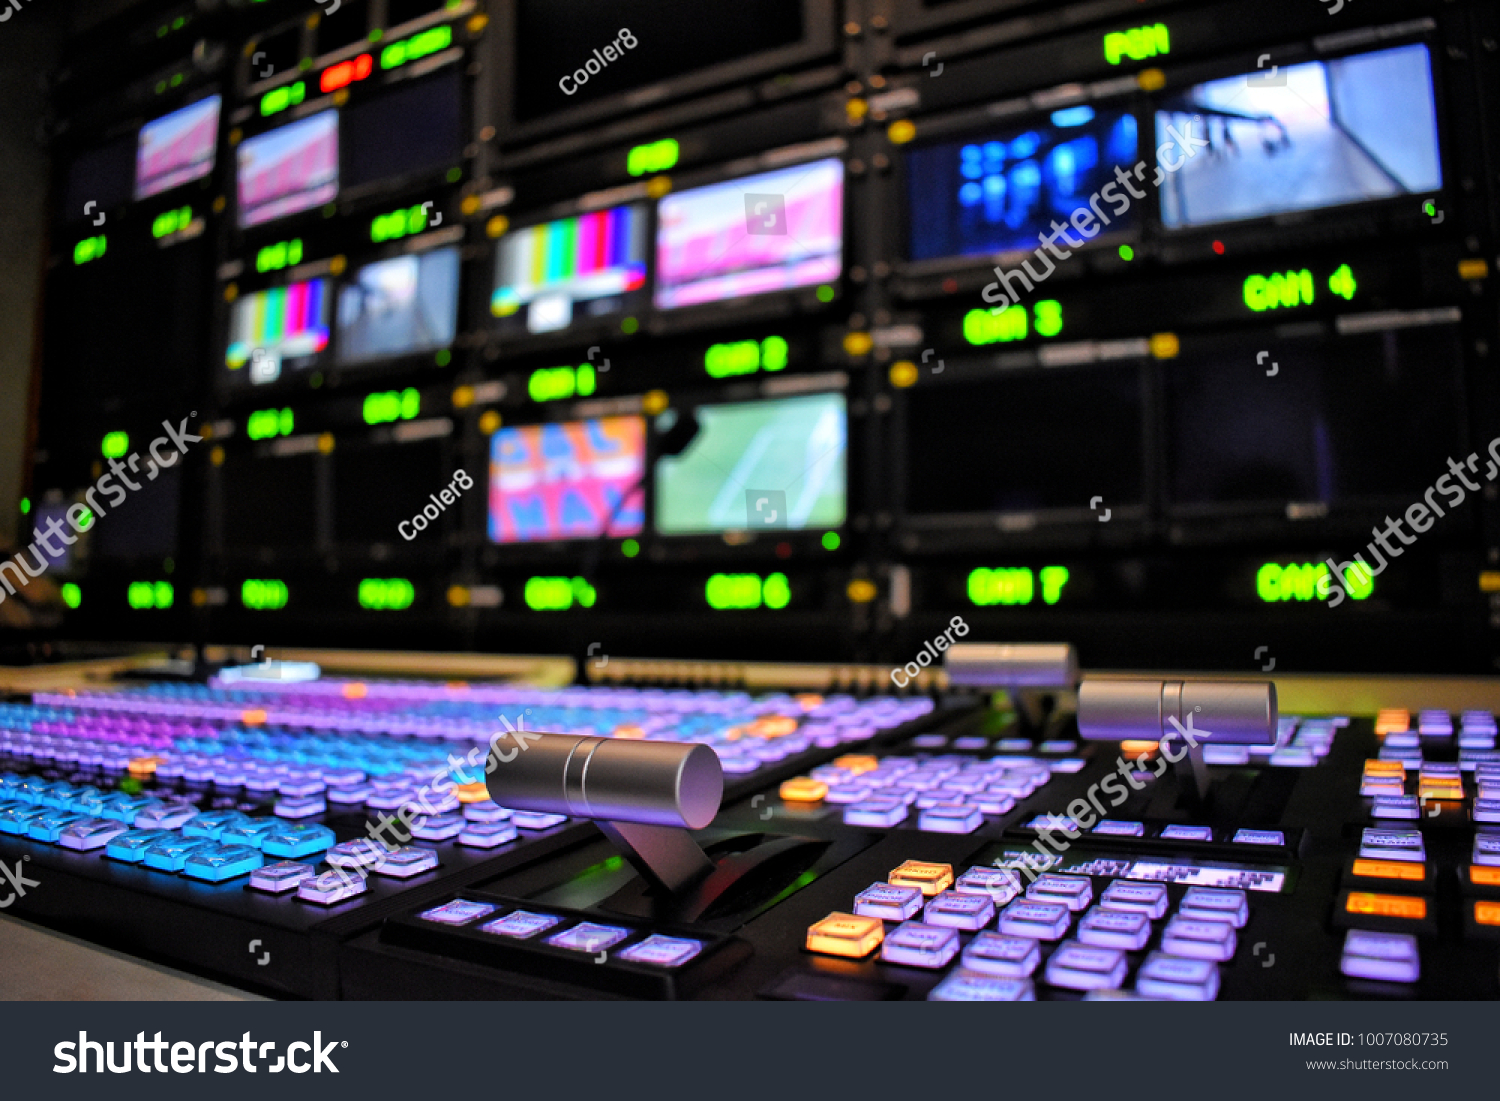 Switchboard for live broadcast production. Equipment in outside broadcasting van. #1007080735